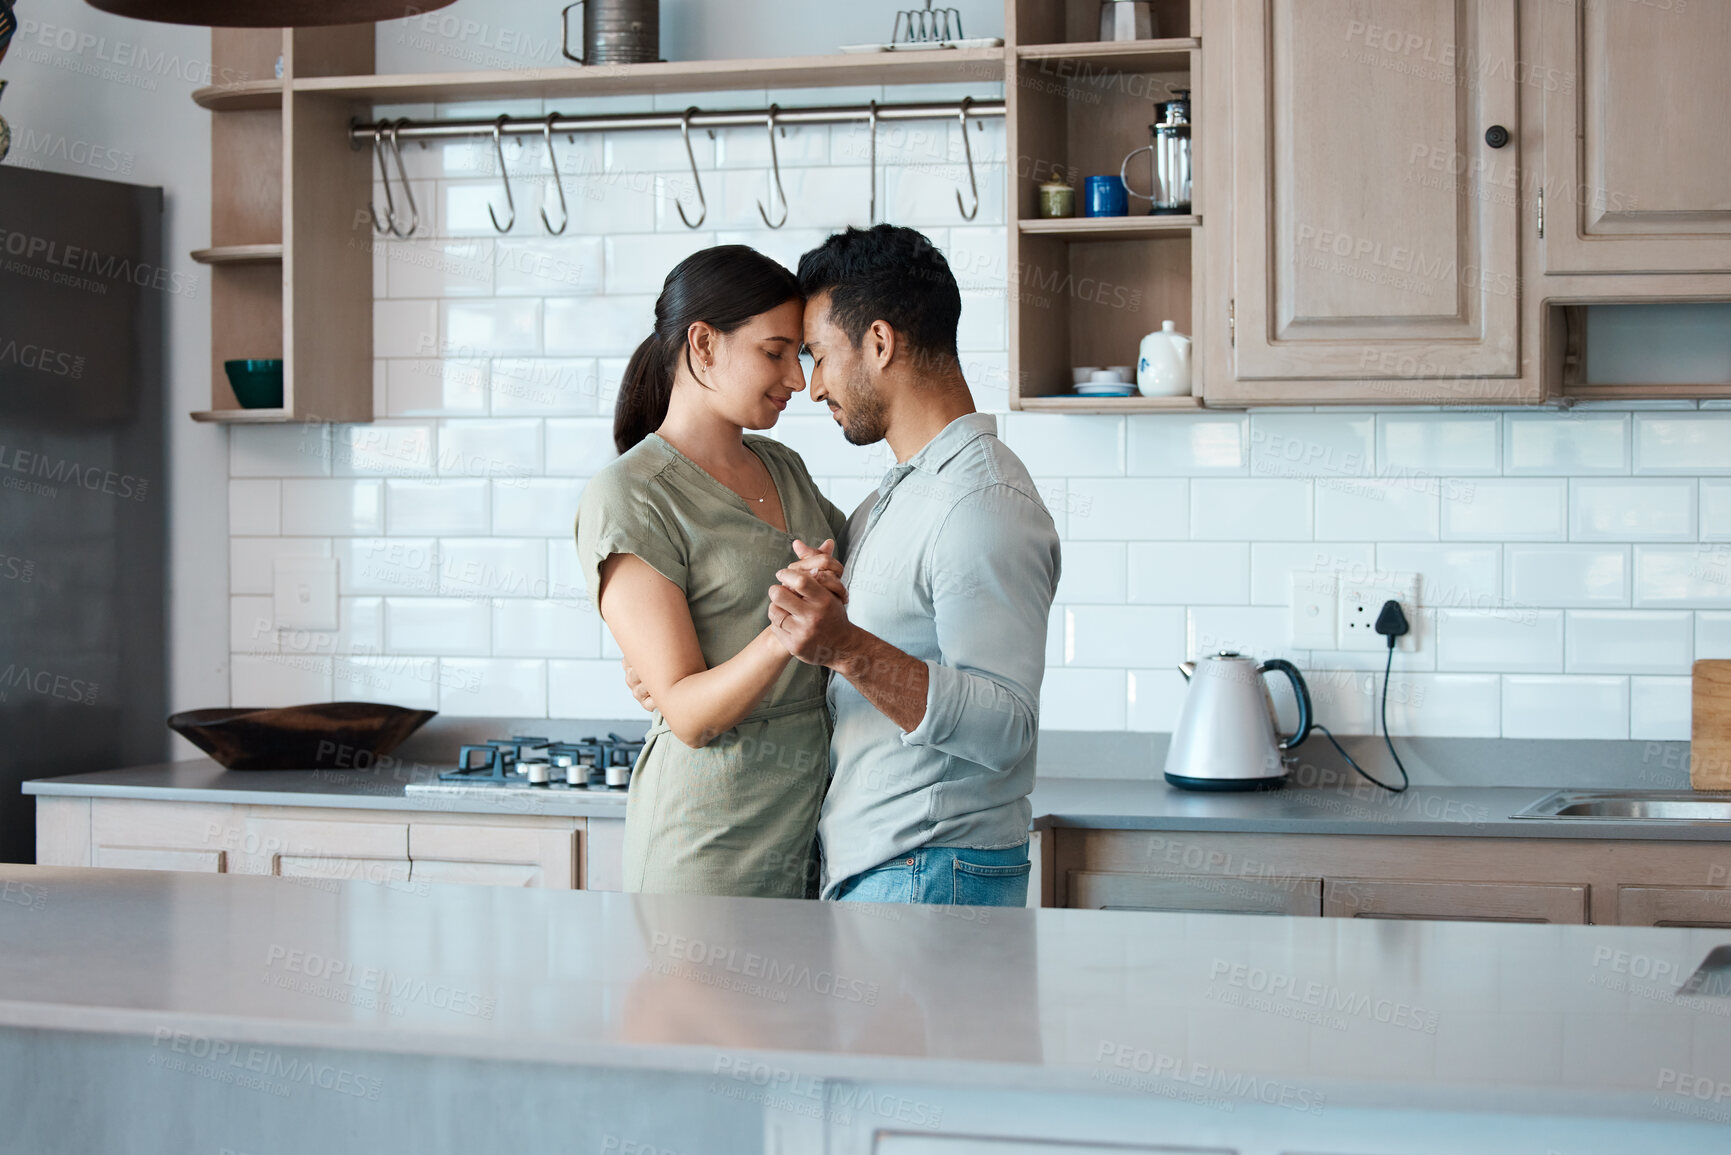 Buy stock photo Shot of a young couple dancing in the kitchen at home